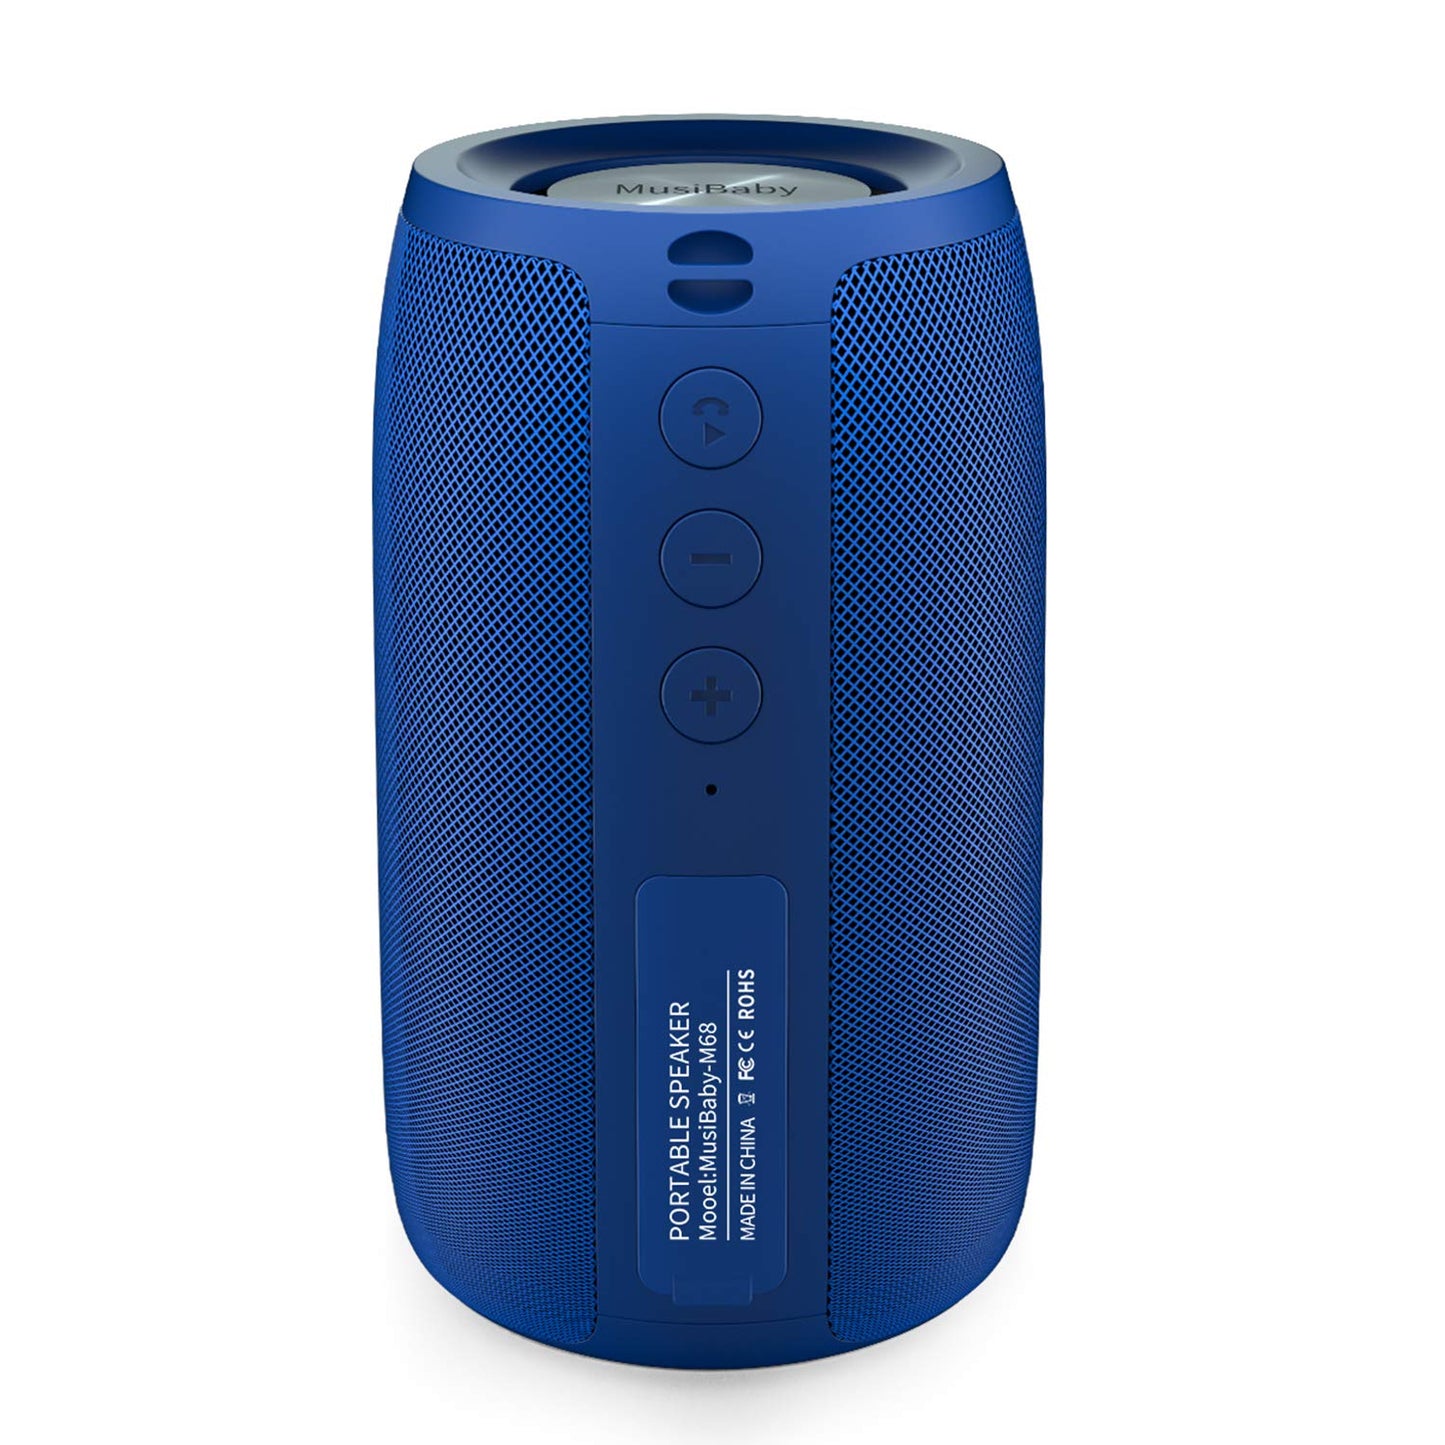 Bluetooth Speakers,MusiBaby Speaker,Outdoor,Wireless,Waterproof, Portable Speaker,Dual Pairing, Bluetooth 5.0,Loud Stereo,Booming Bass,1500 Mins Playtime for Home,Party,Gifts(Blue)